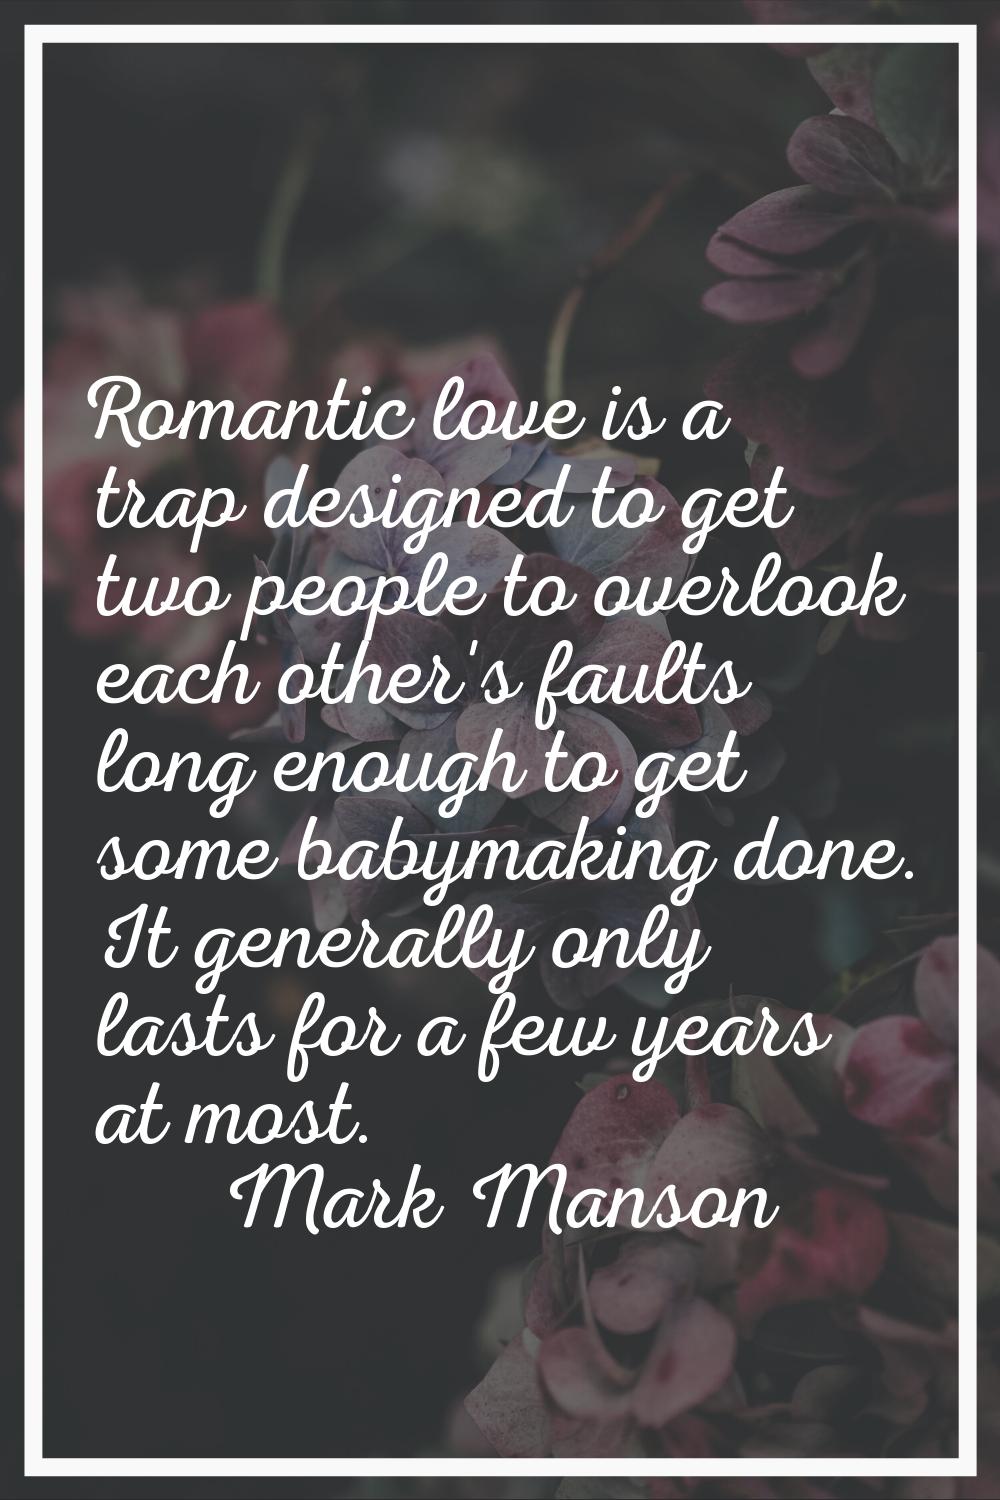 Romantic love is a trap designed to get two people to overlook each other's faults long enough to g